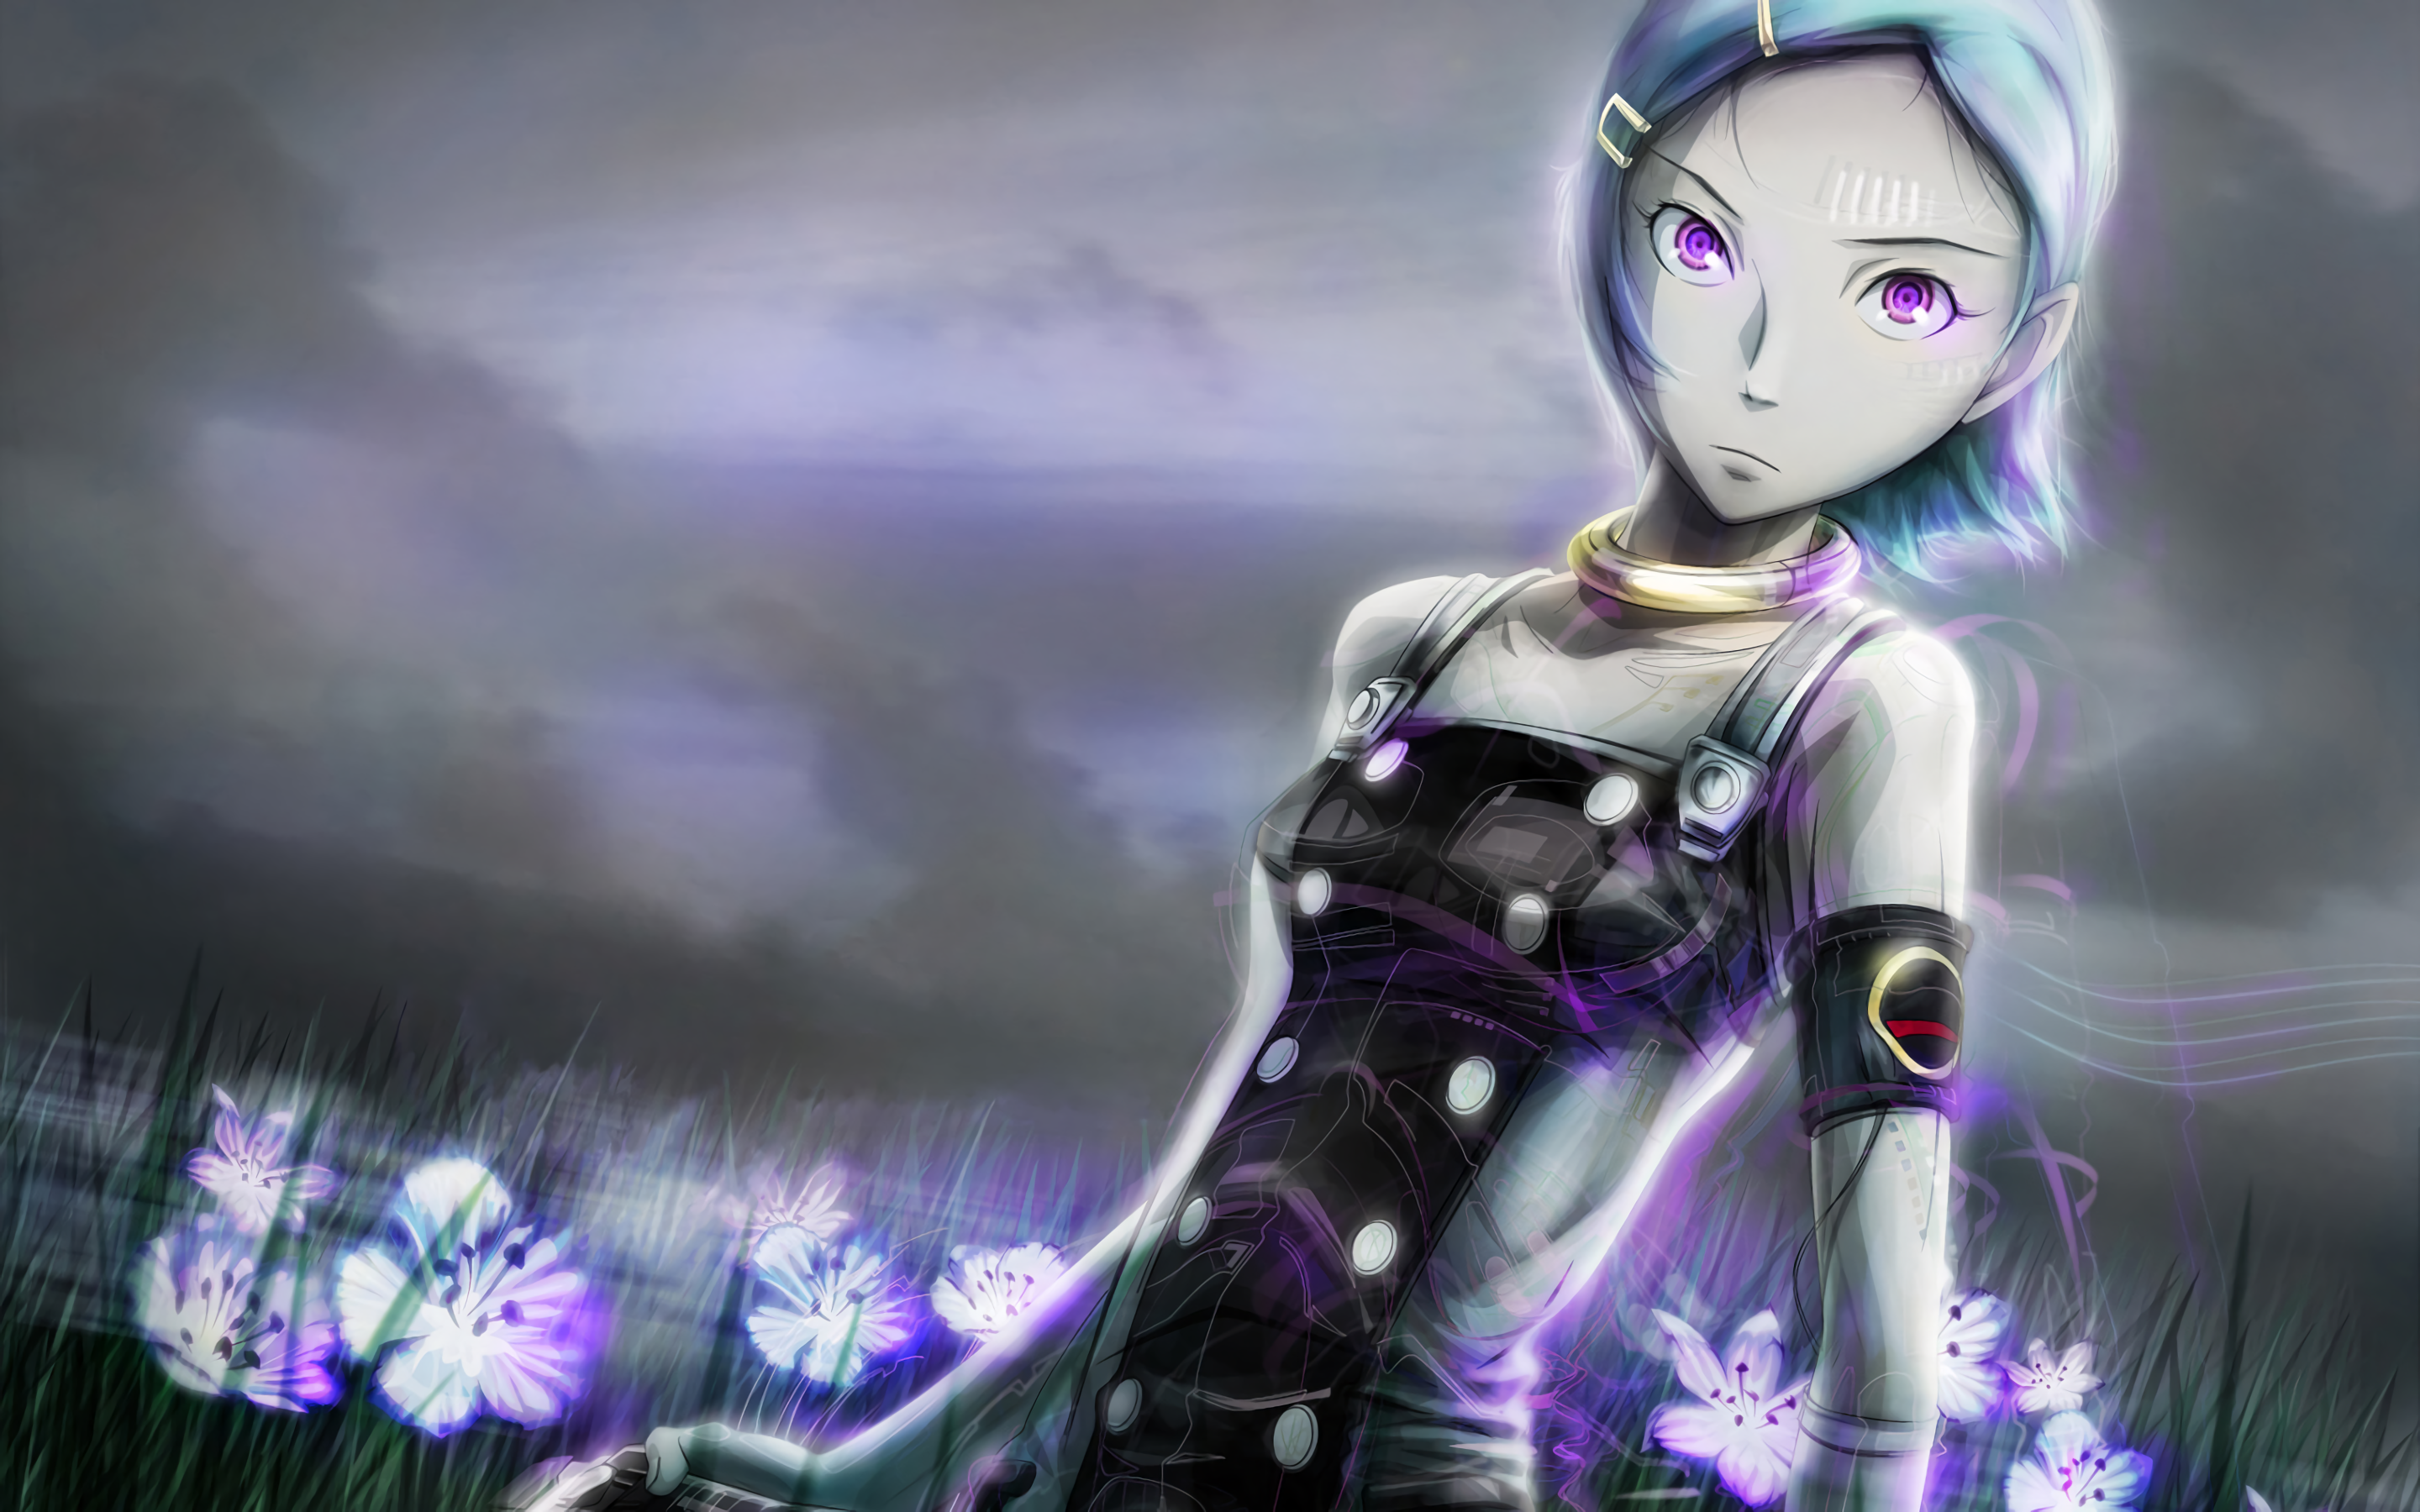 100+ Eureka Seven HD Wallpapers and Backgrounds